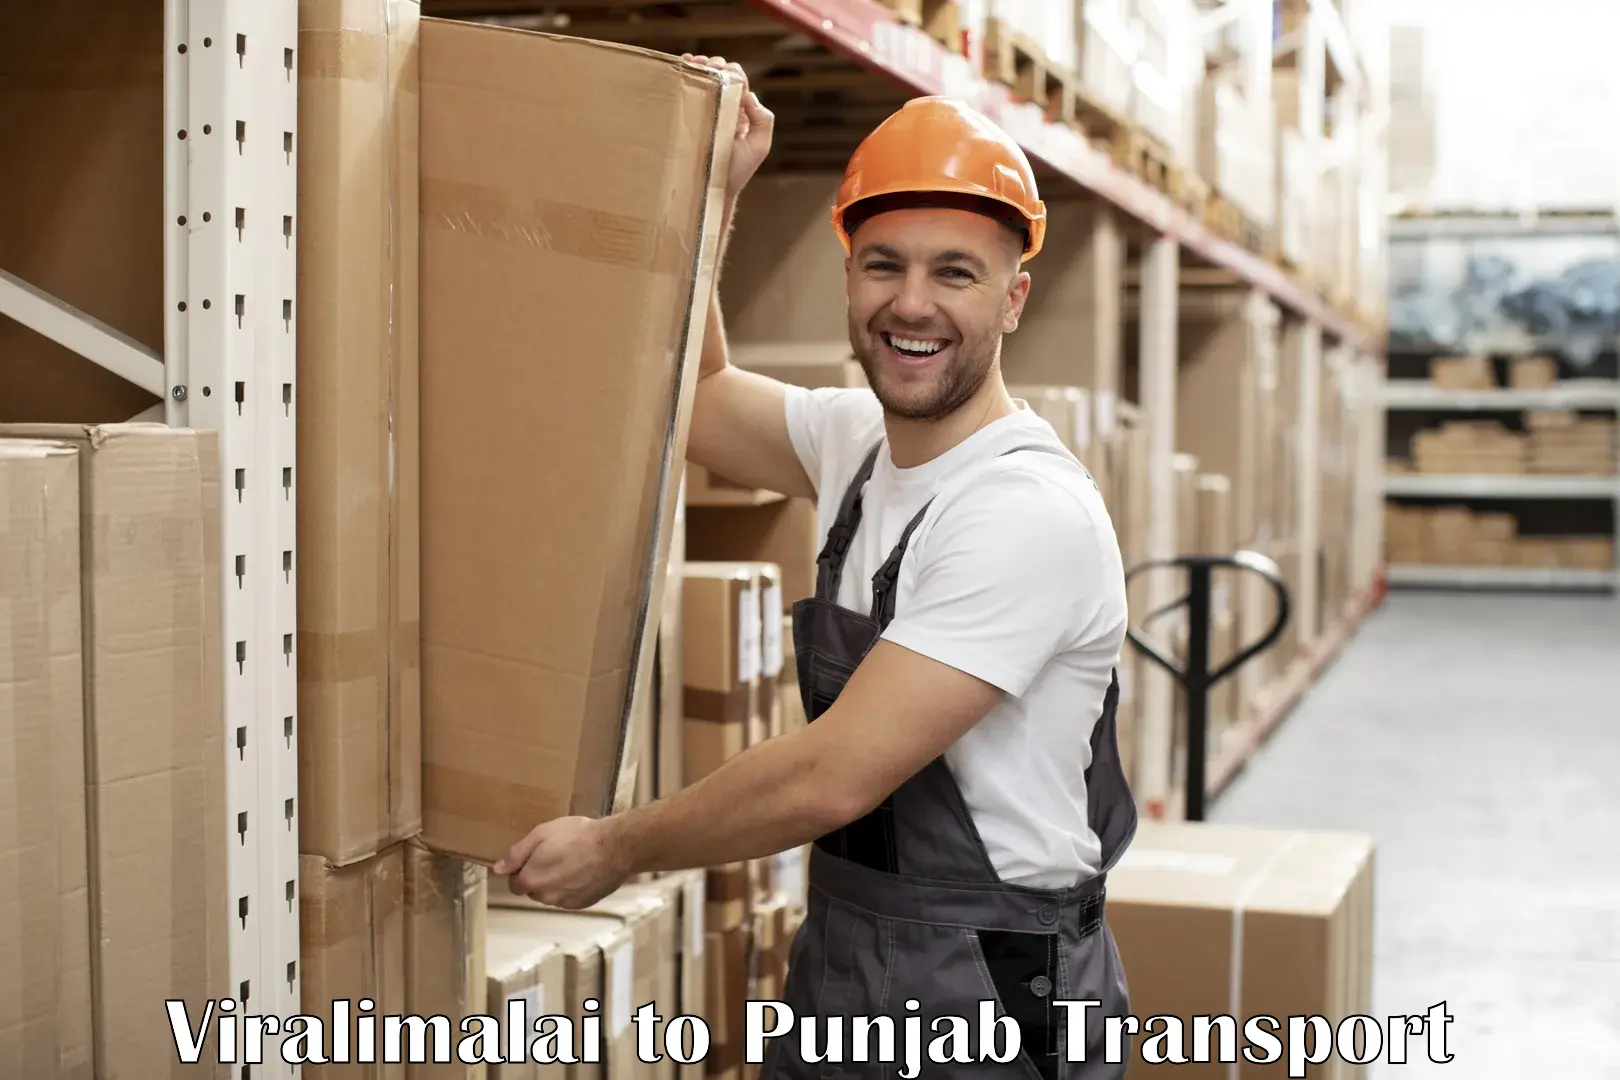 Delivery service Viralimalai to Pathankot